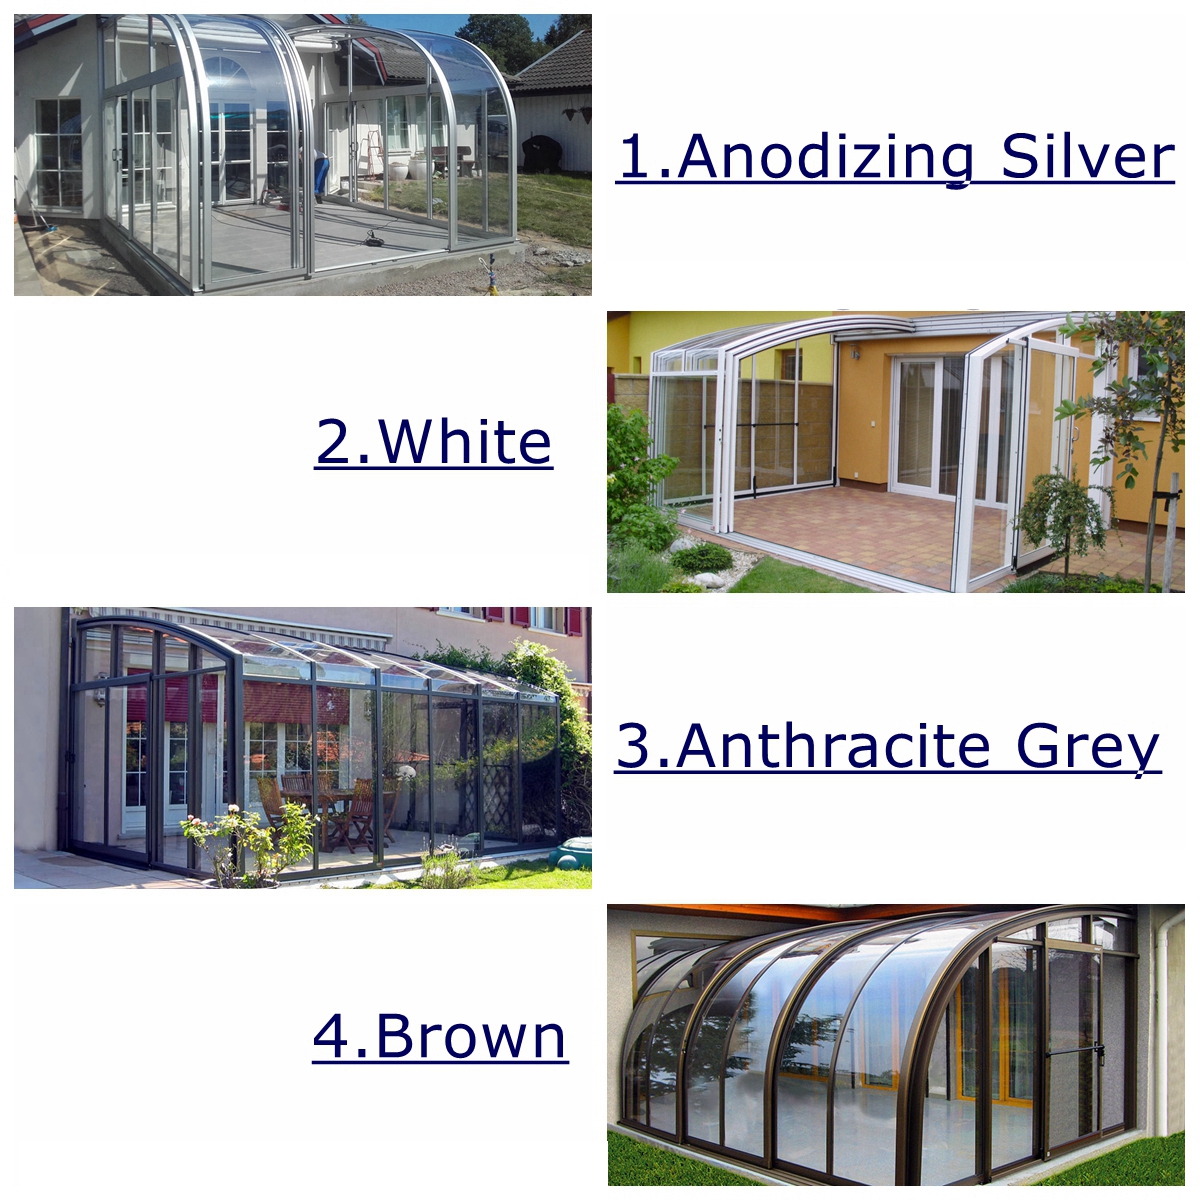 Lean to Sunroom Glass Sliding Roof for balcony dack/ Operable roof system